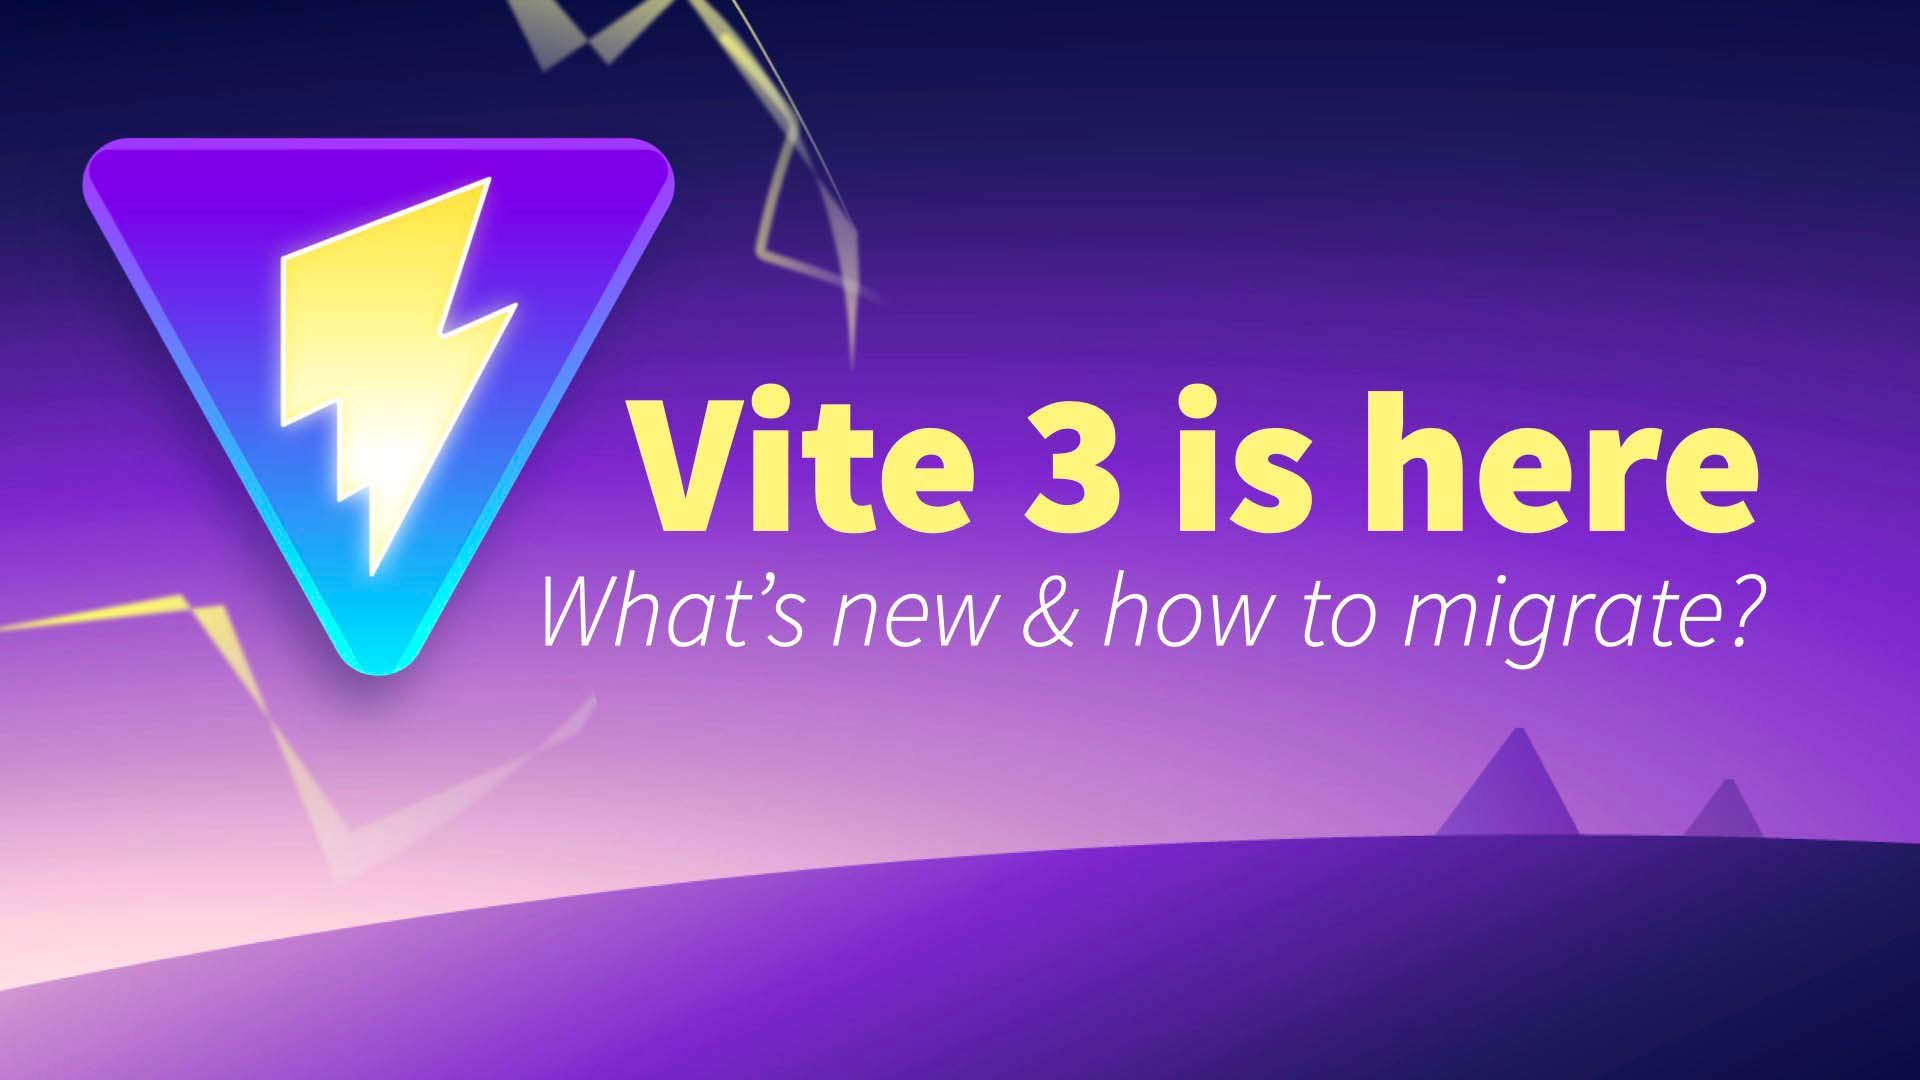 Vite 3 is here! What’s new + how to migrate